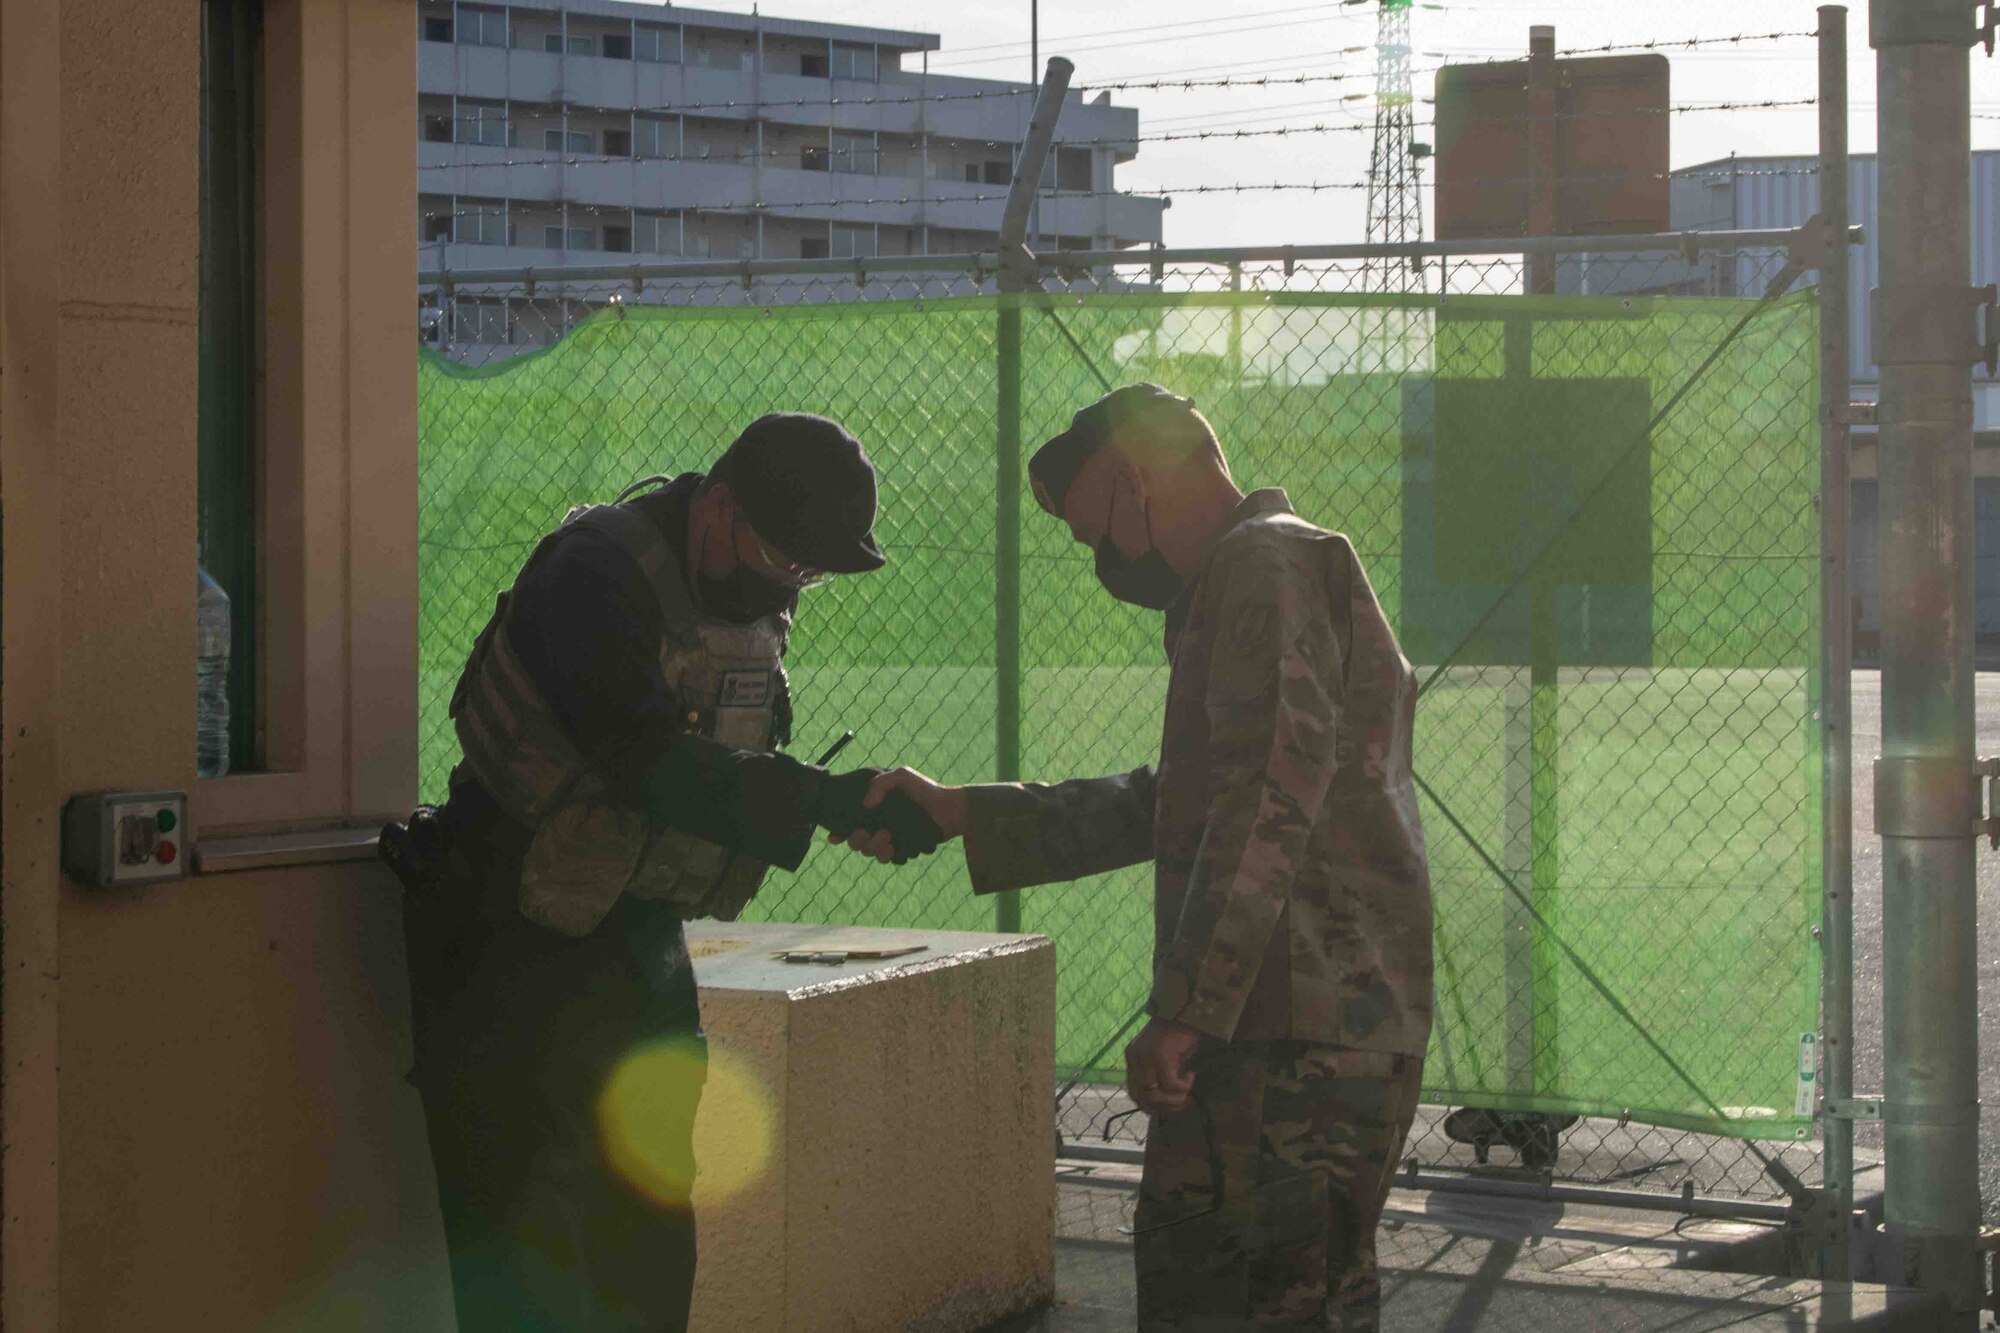 Maj. Gen. Tom Wilcox, Air Force Installation and Mission Support Center commander, greets a defender from the 374th Security Forces Squadron during a site visit at Yokota Air Base, Japan, Feb. 9, 2022.